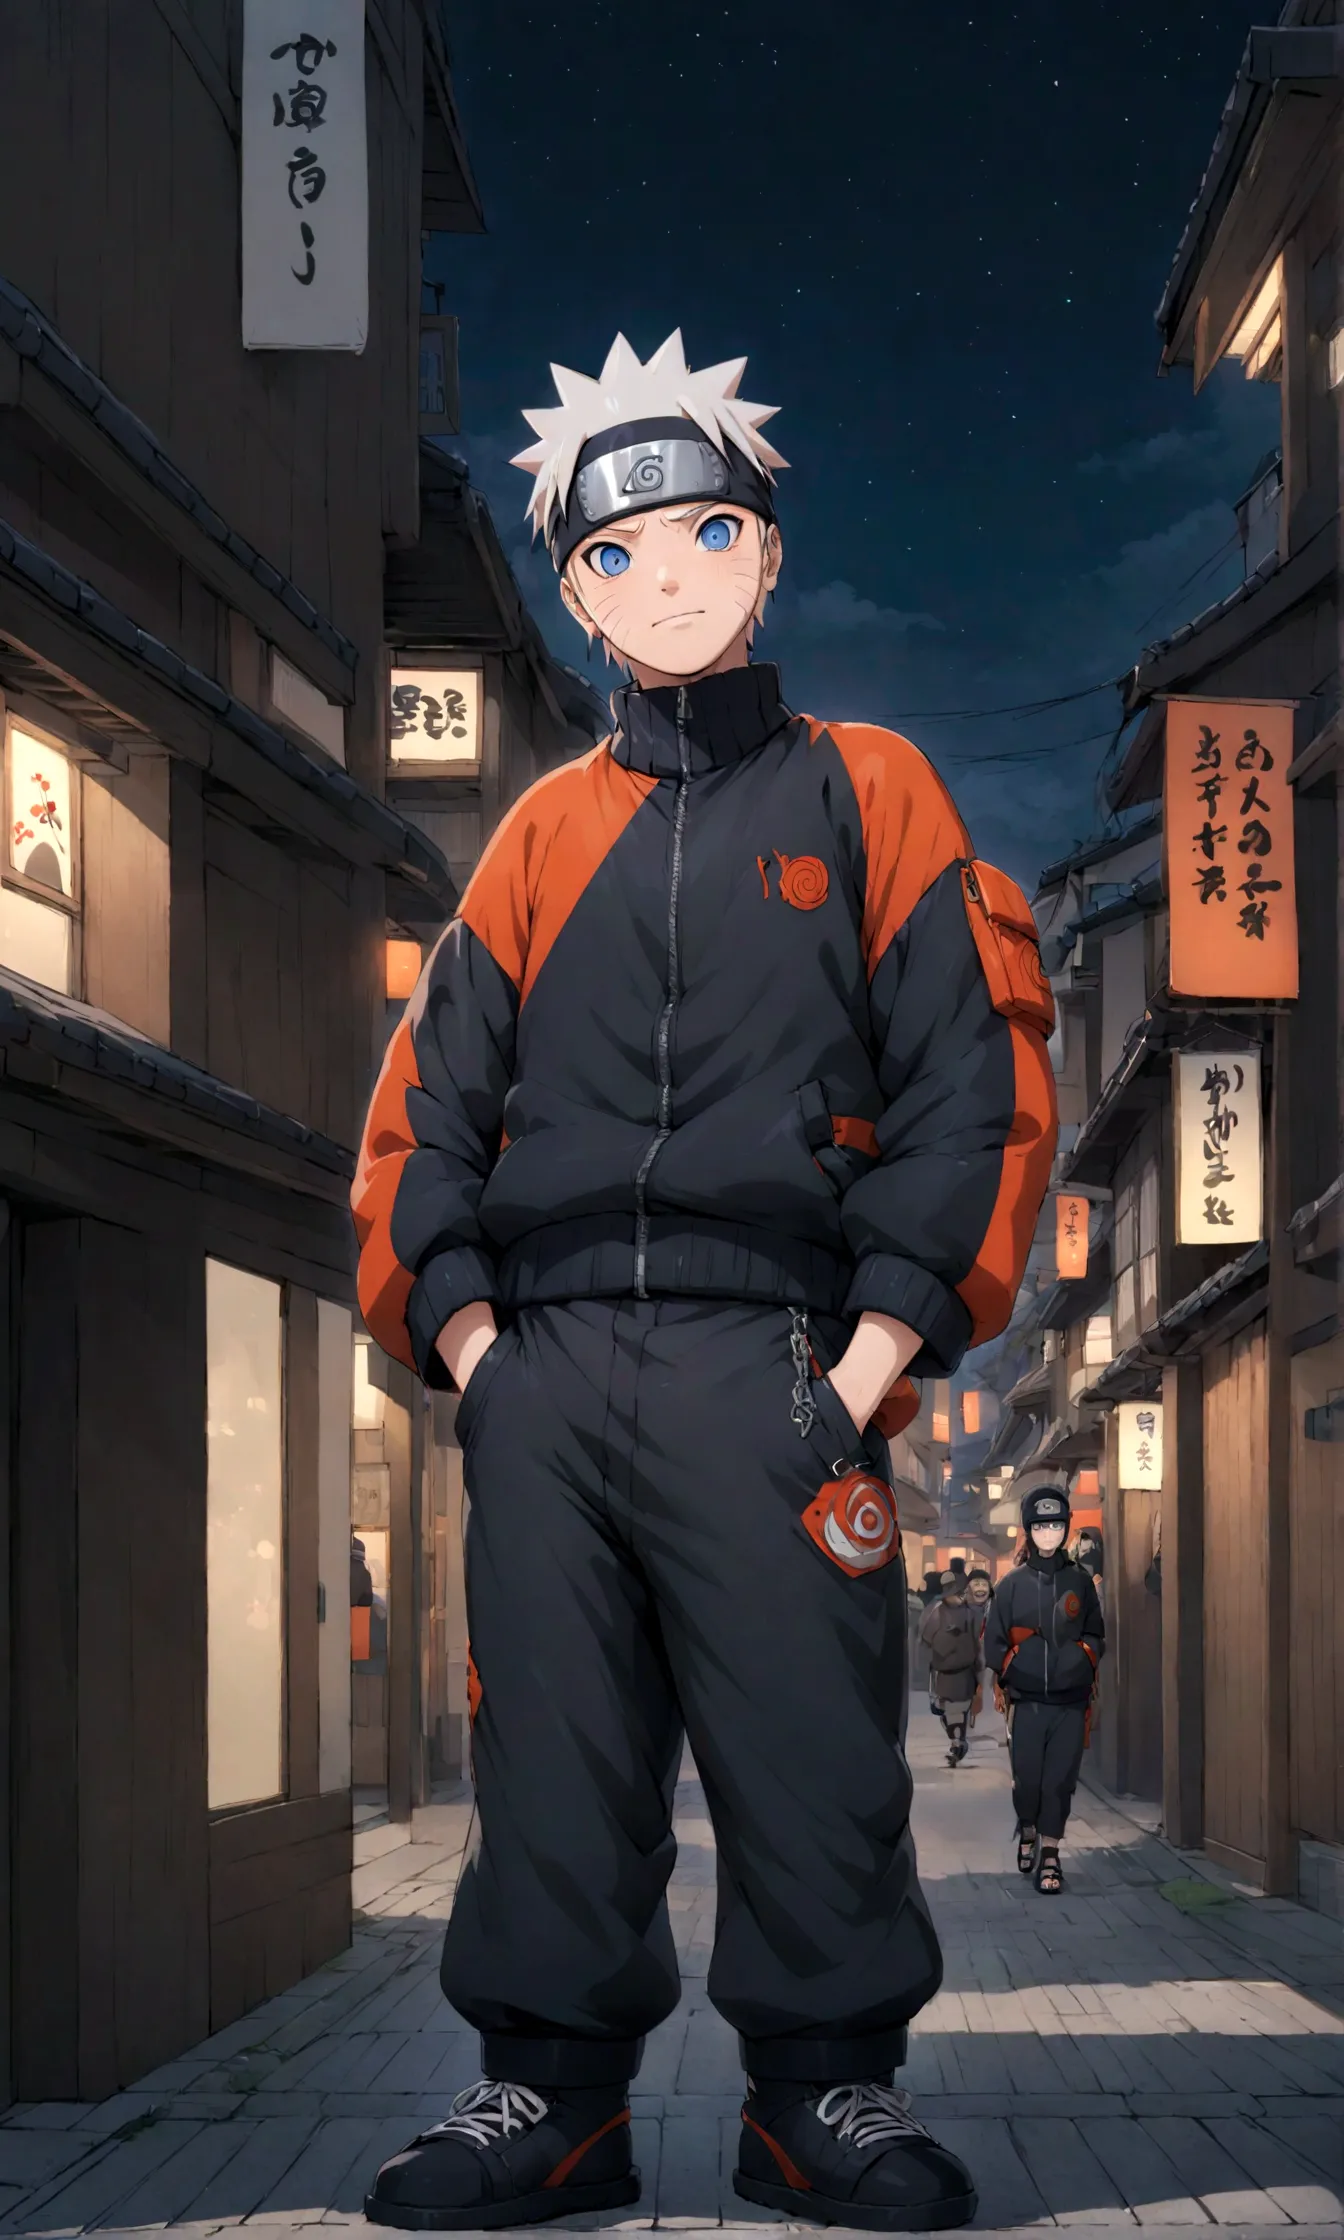 Naruto in streetwear clothes, japanese modern town, night